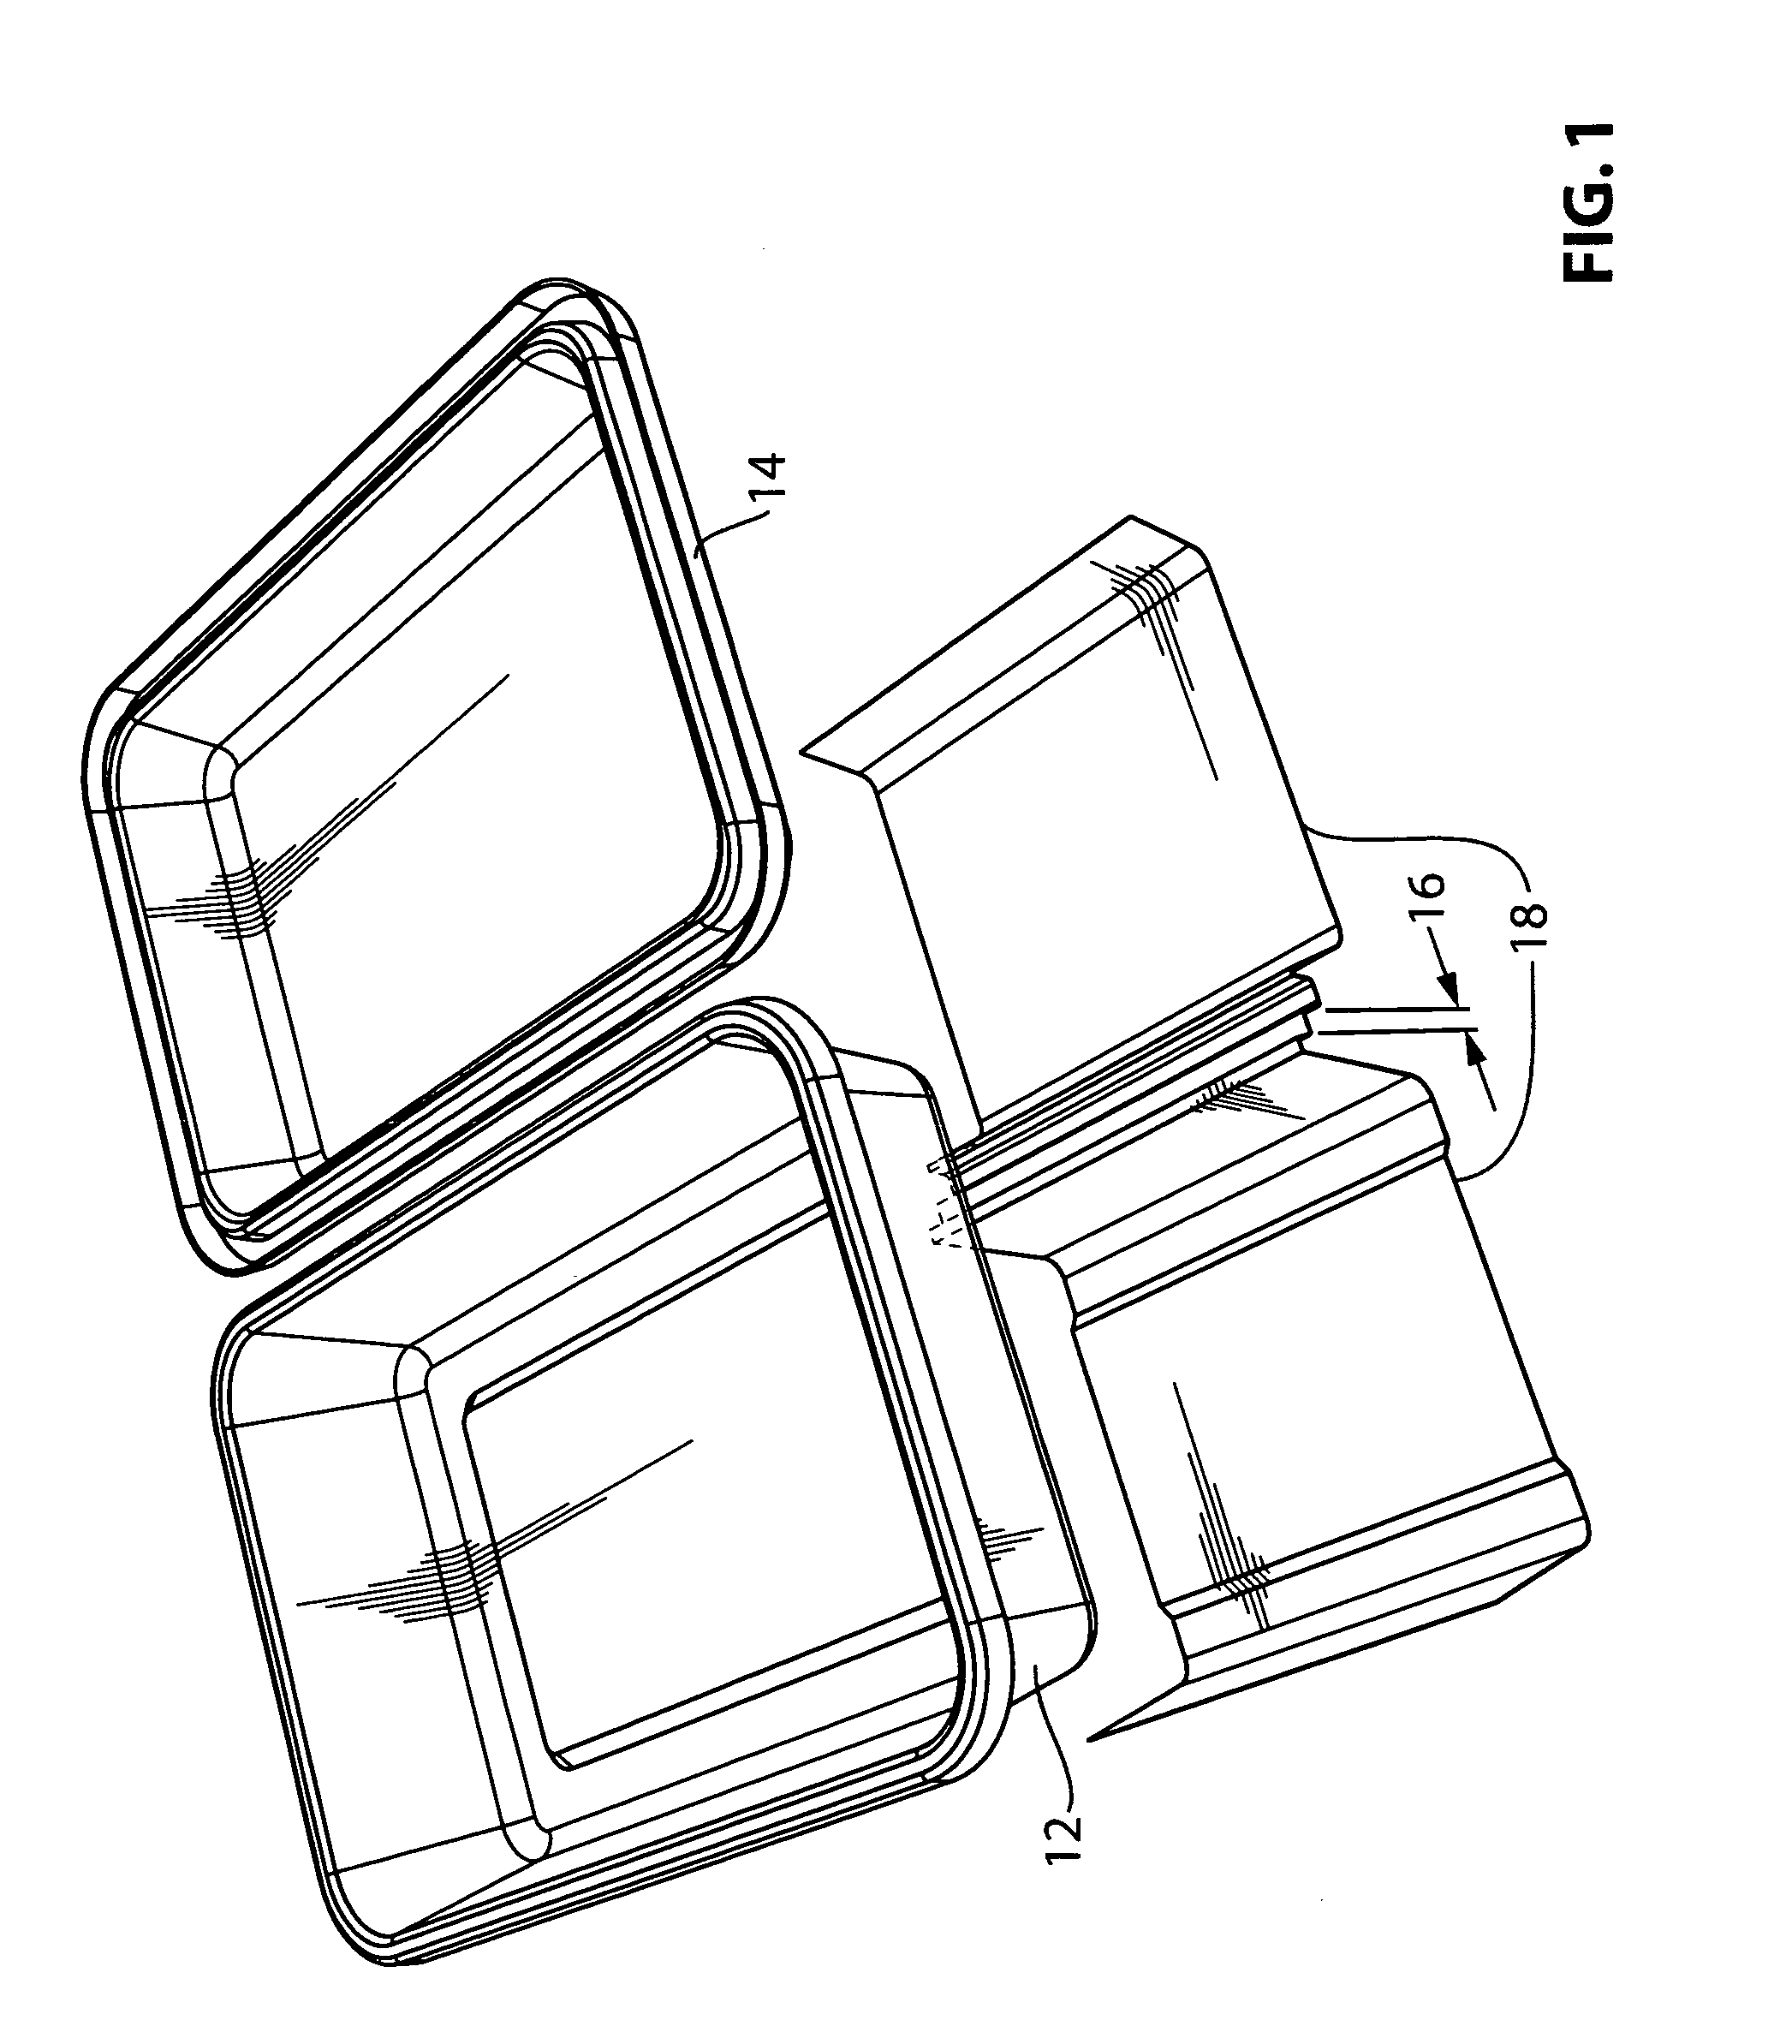 Injection moulded clam shell container utilizing label as hinge element